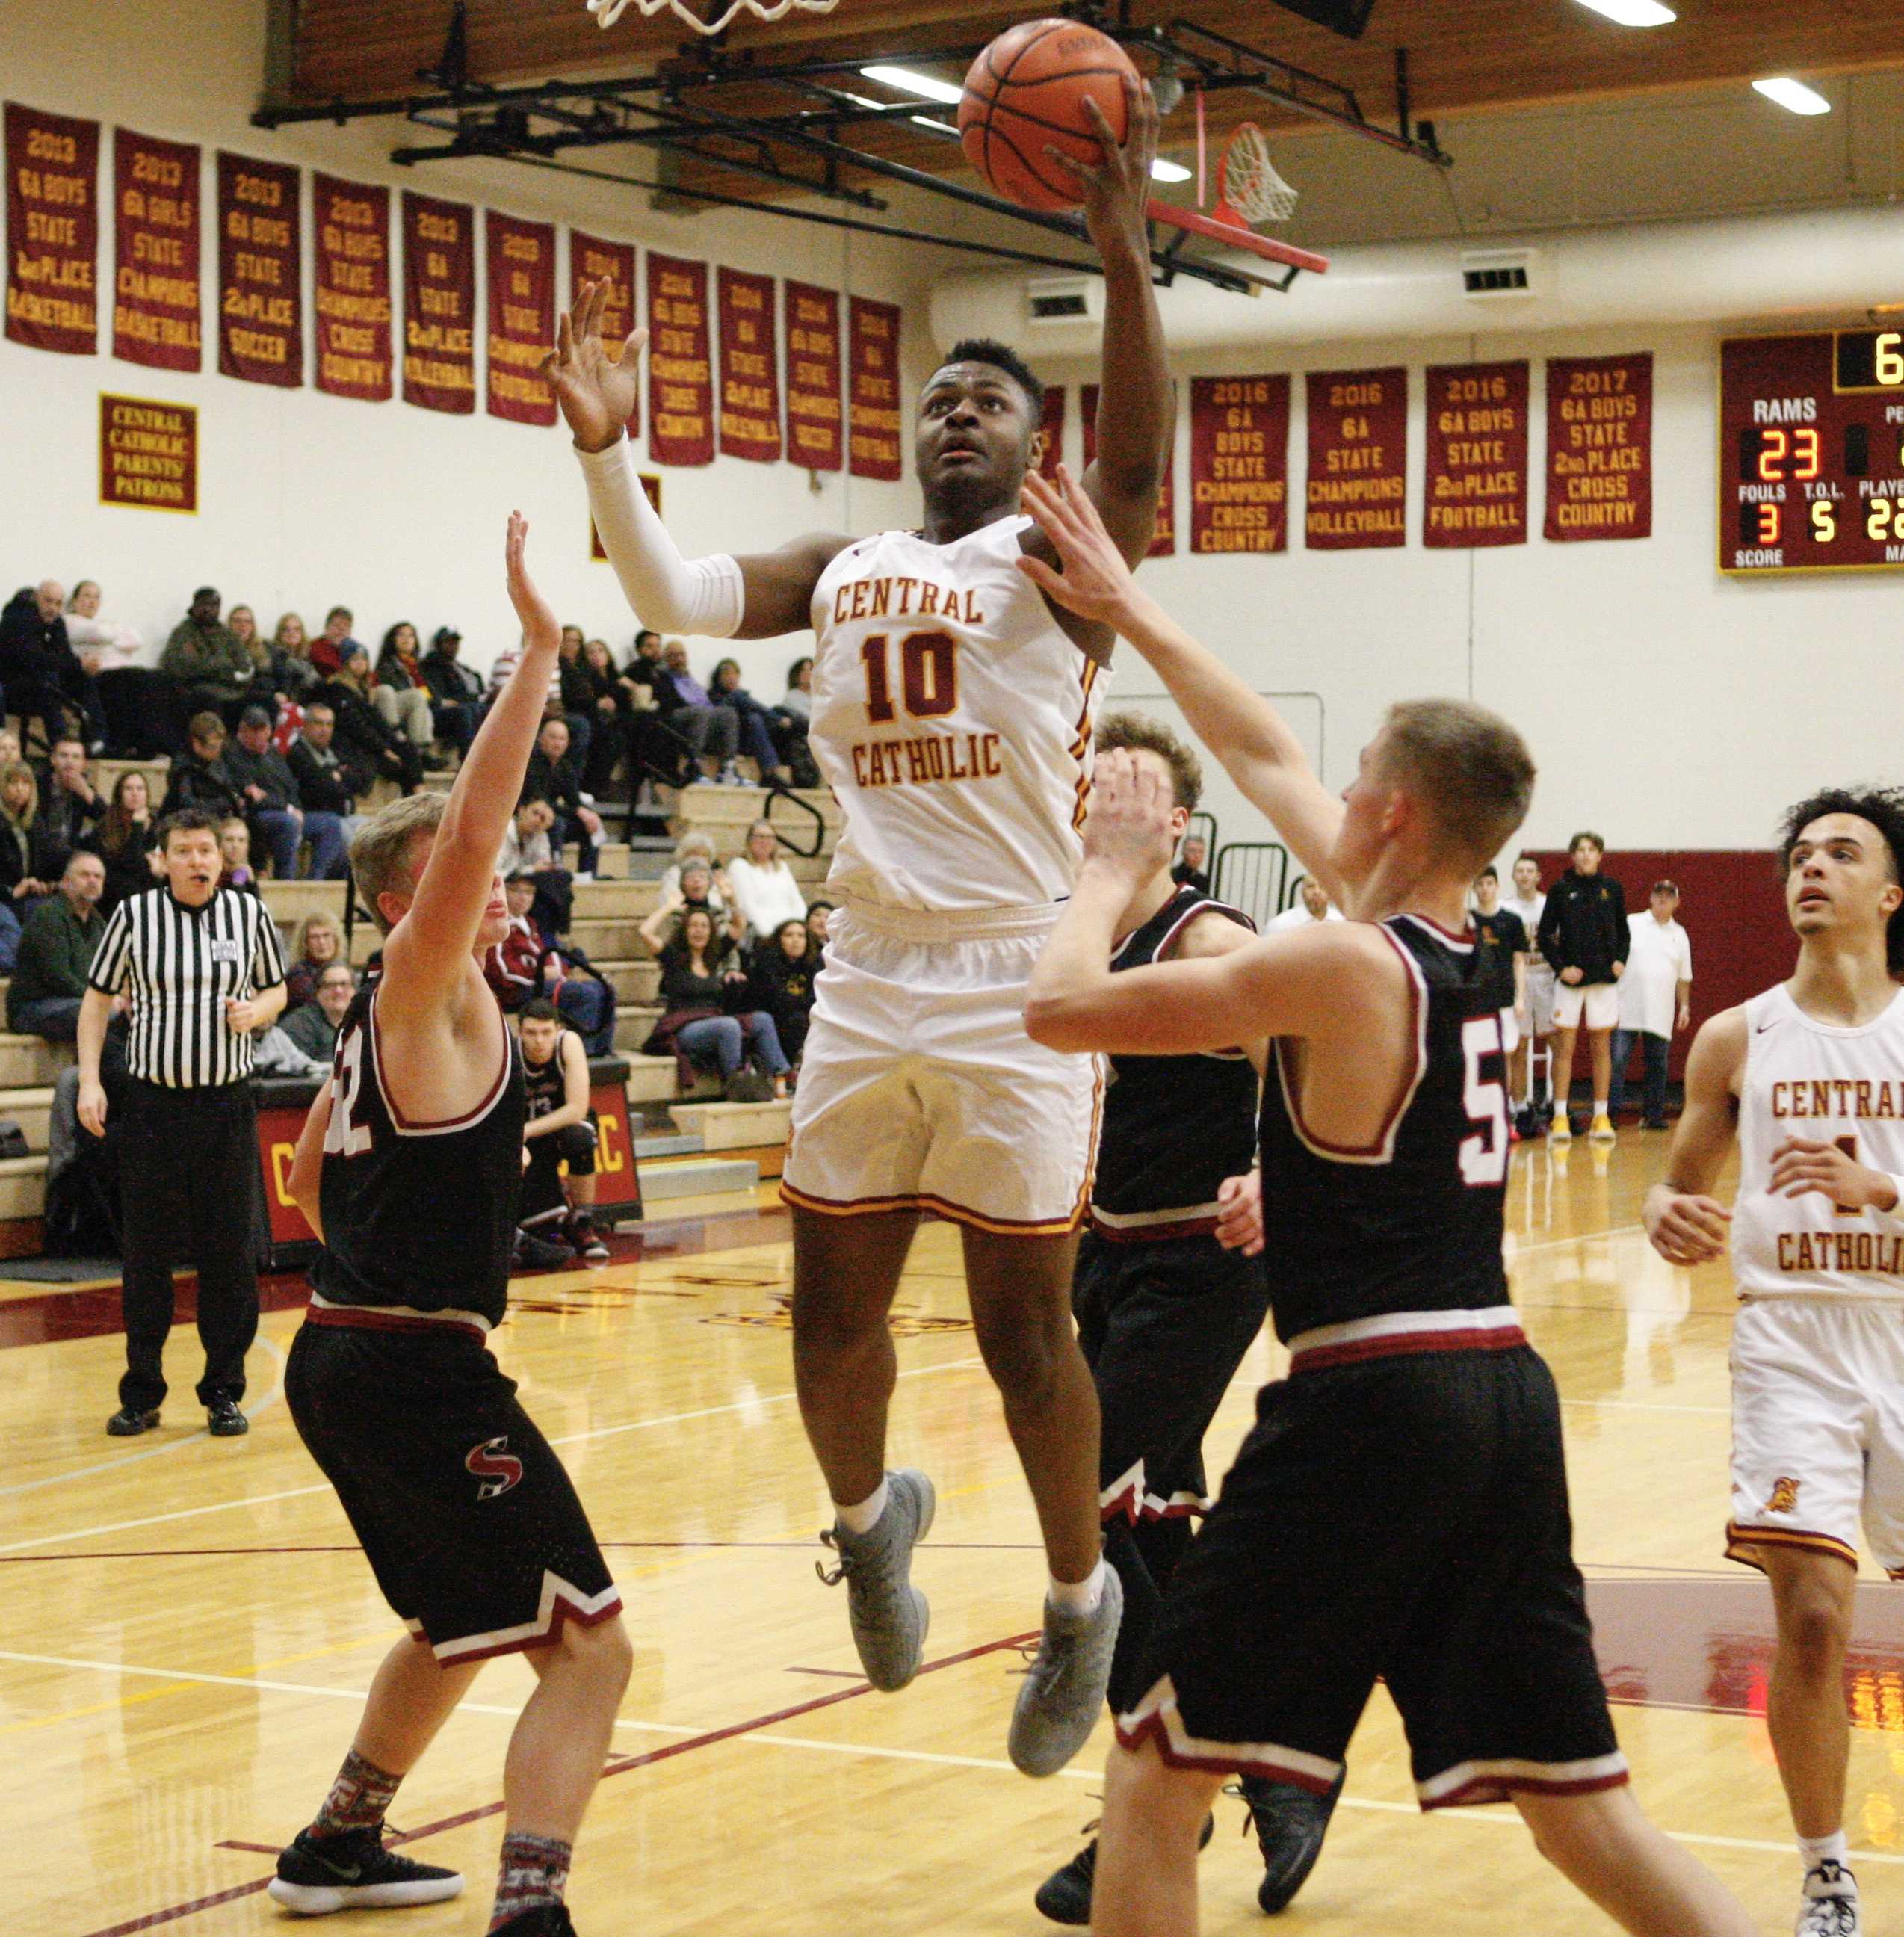 Central Catholic junior SataieVior Ayilola skies over three Sandy defenders for two of his 17 points.